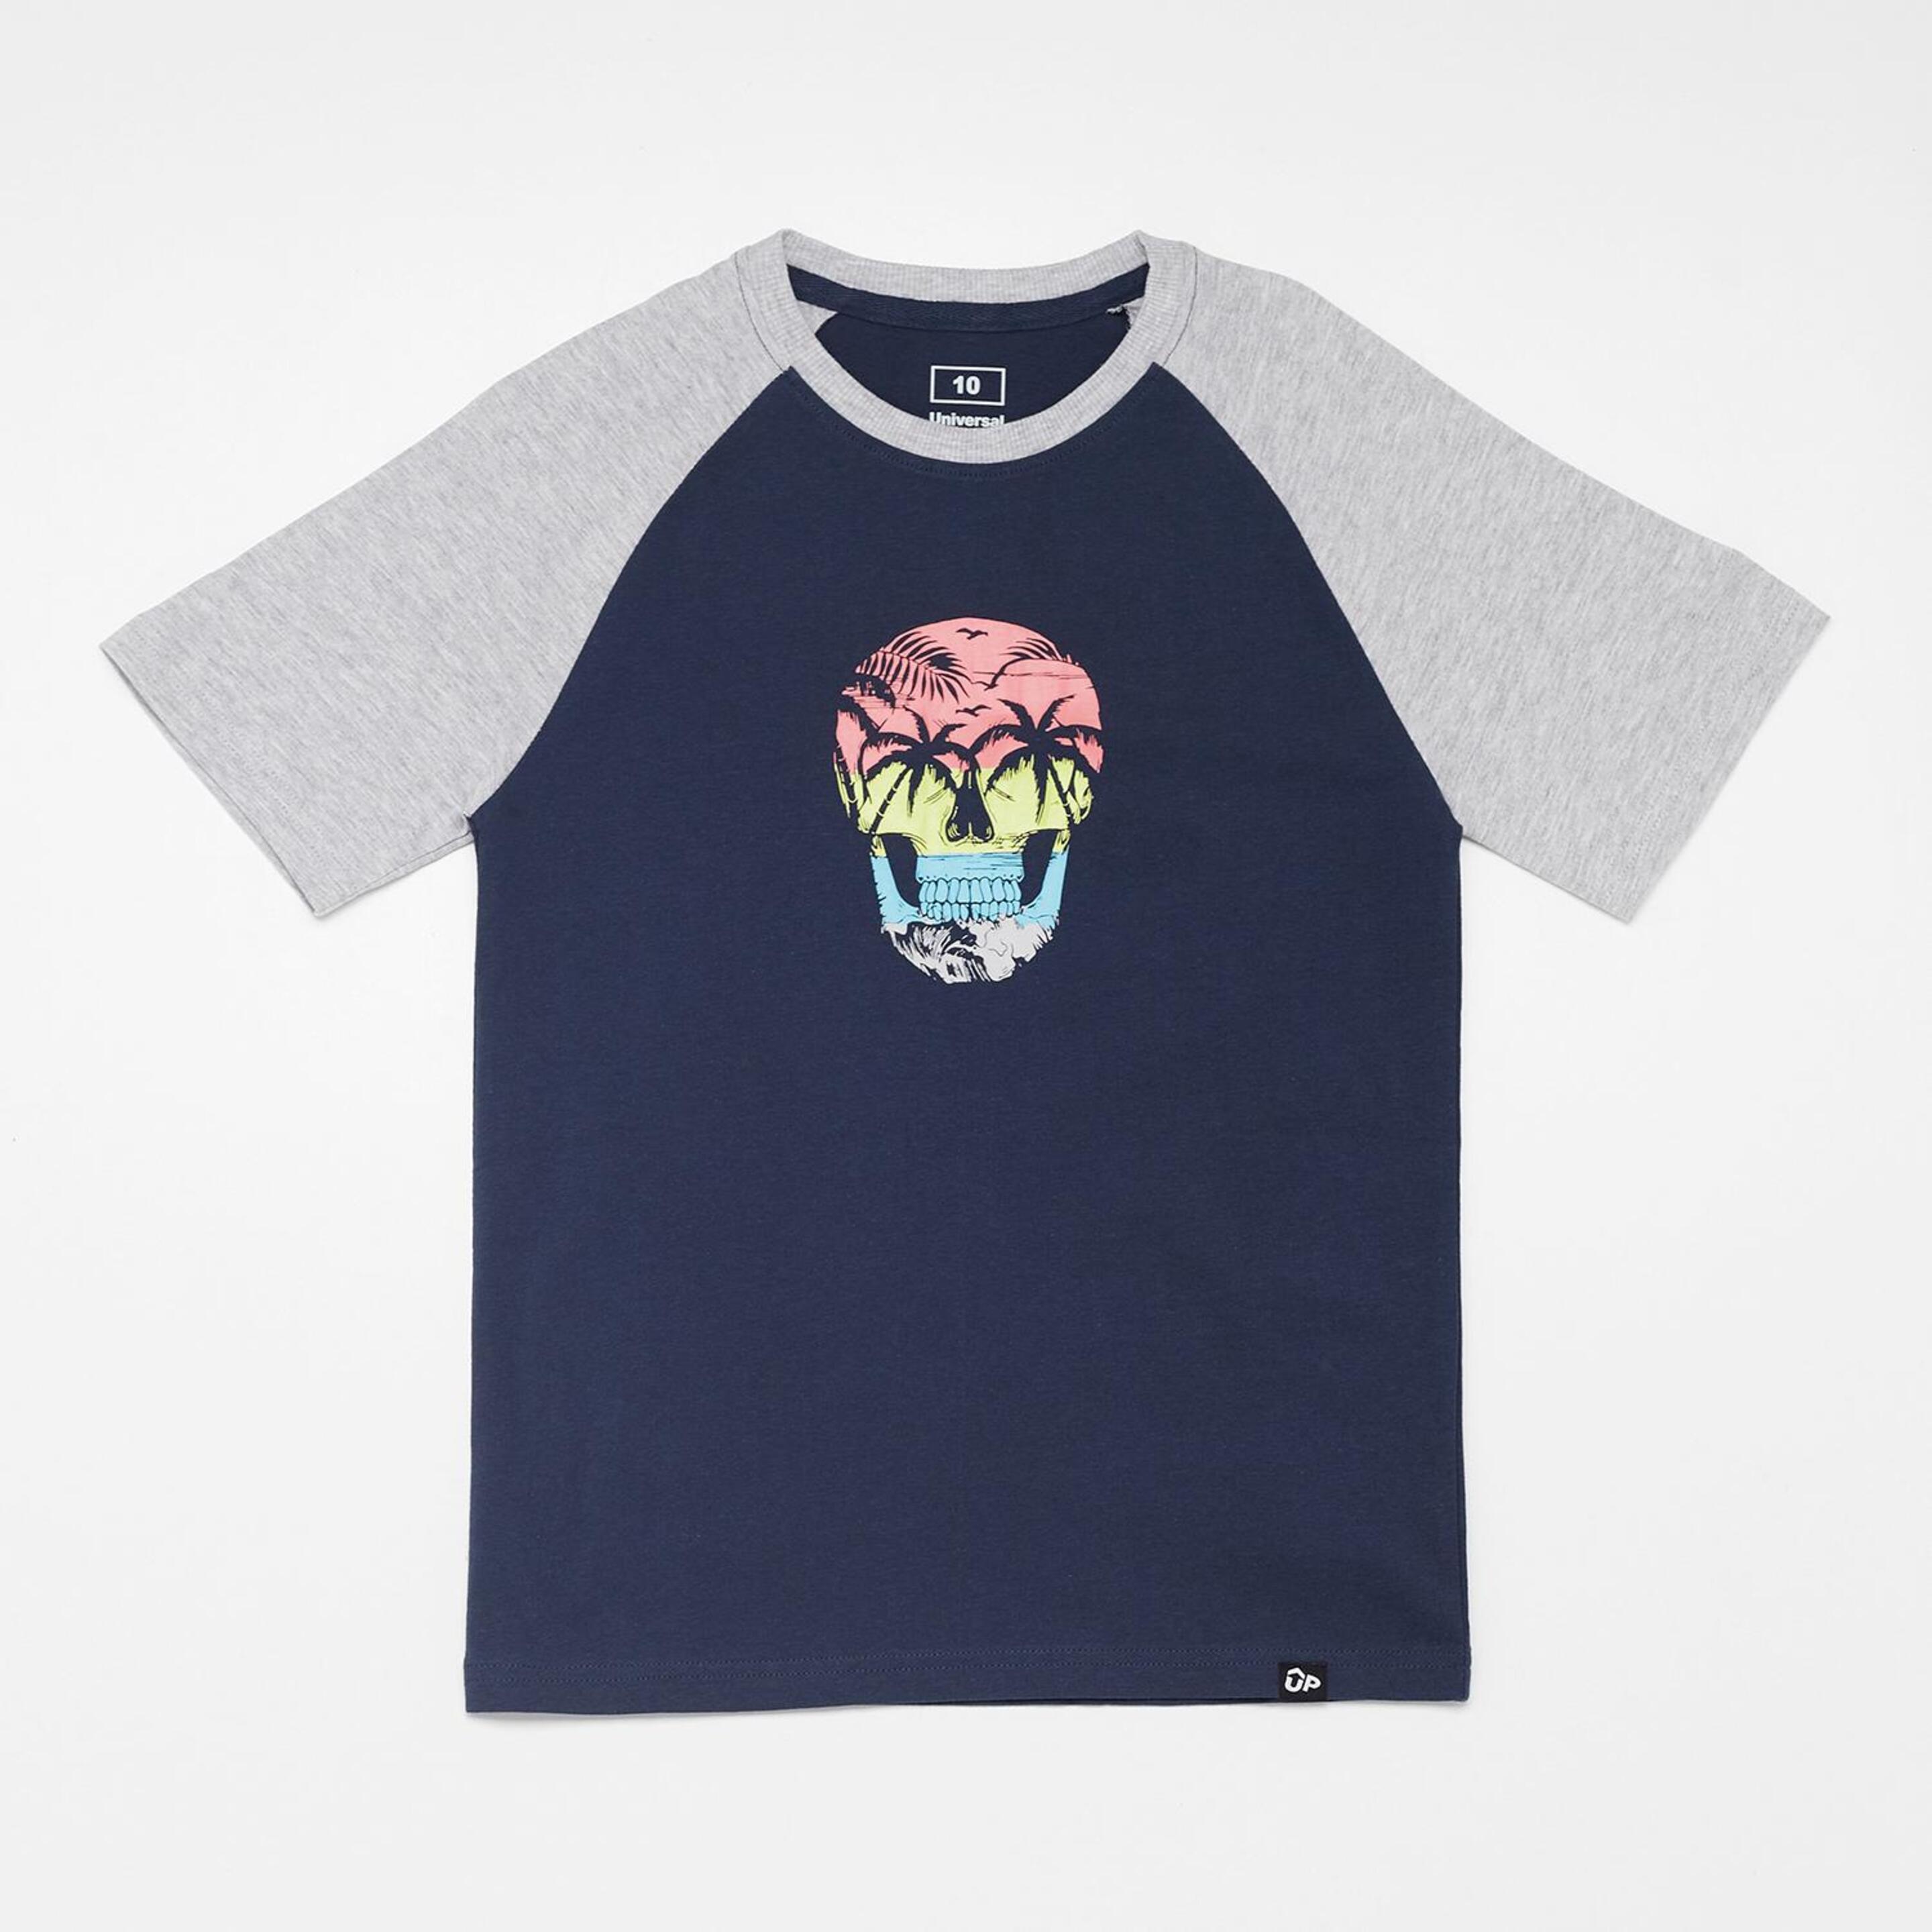 Up Stamps - azul - T-shirt Rapaz